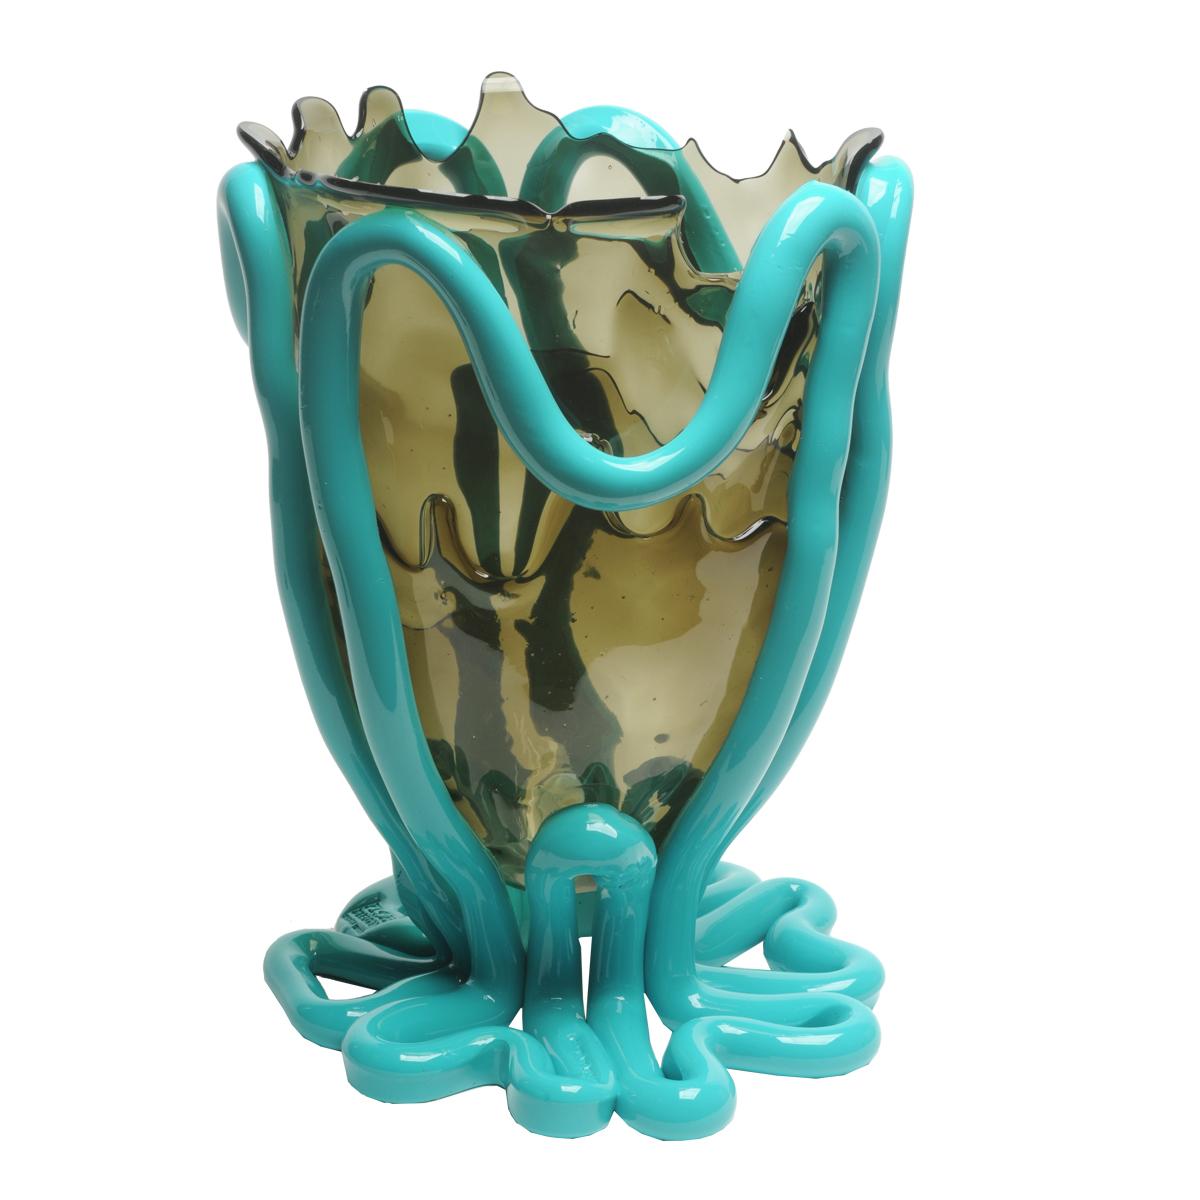 Indian Summer vase - Clear grey and matt turquoise

Vase in soft resin designed by Gaetano Pesce in 1995 for Fish Design collection.

Measures: XL - ø 30cm x H 56cm

Other sizes available.

Colours: Clear grey and matte turquoise.
Vase in soft resin